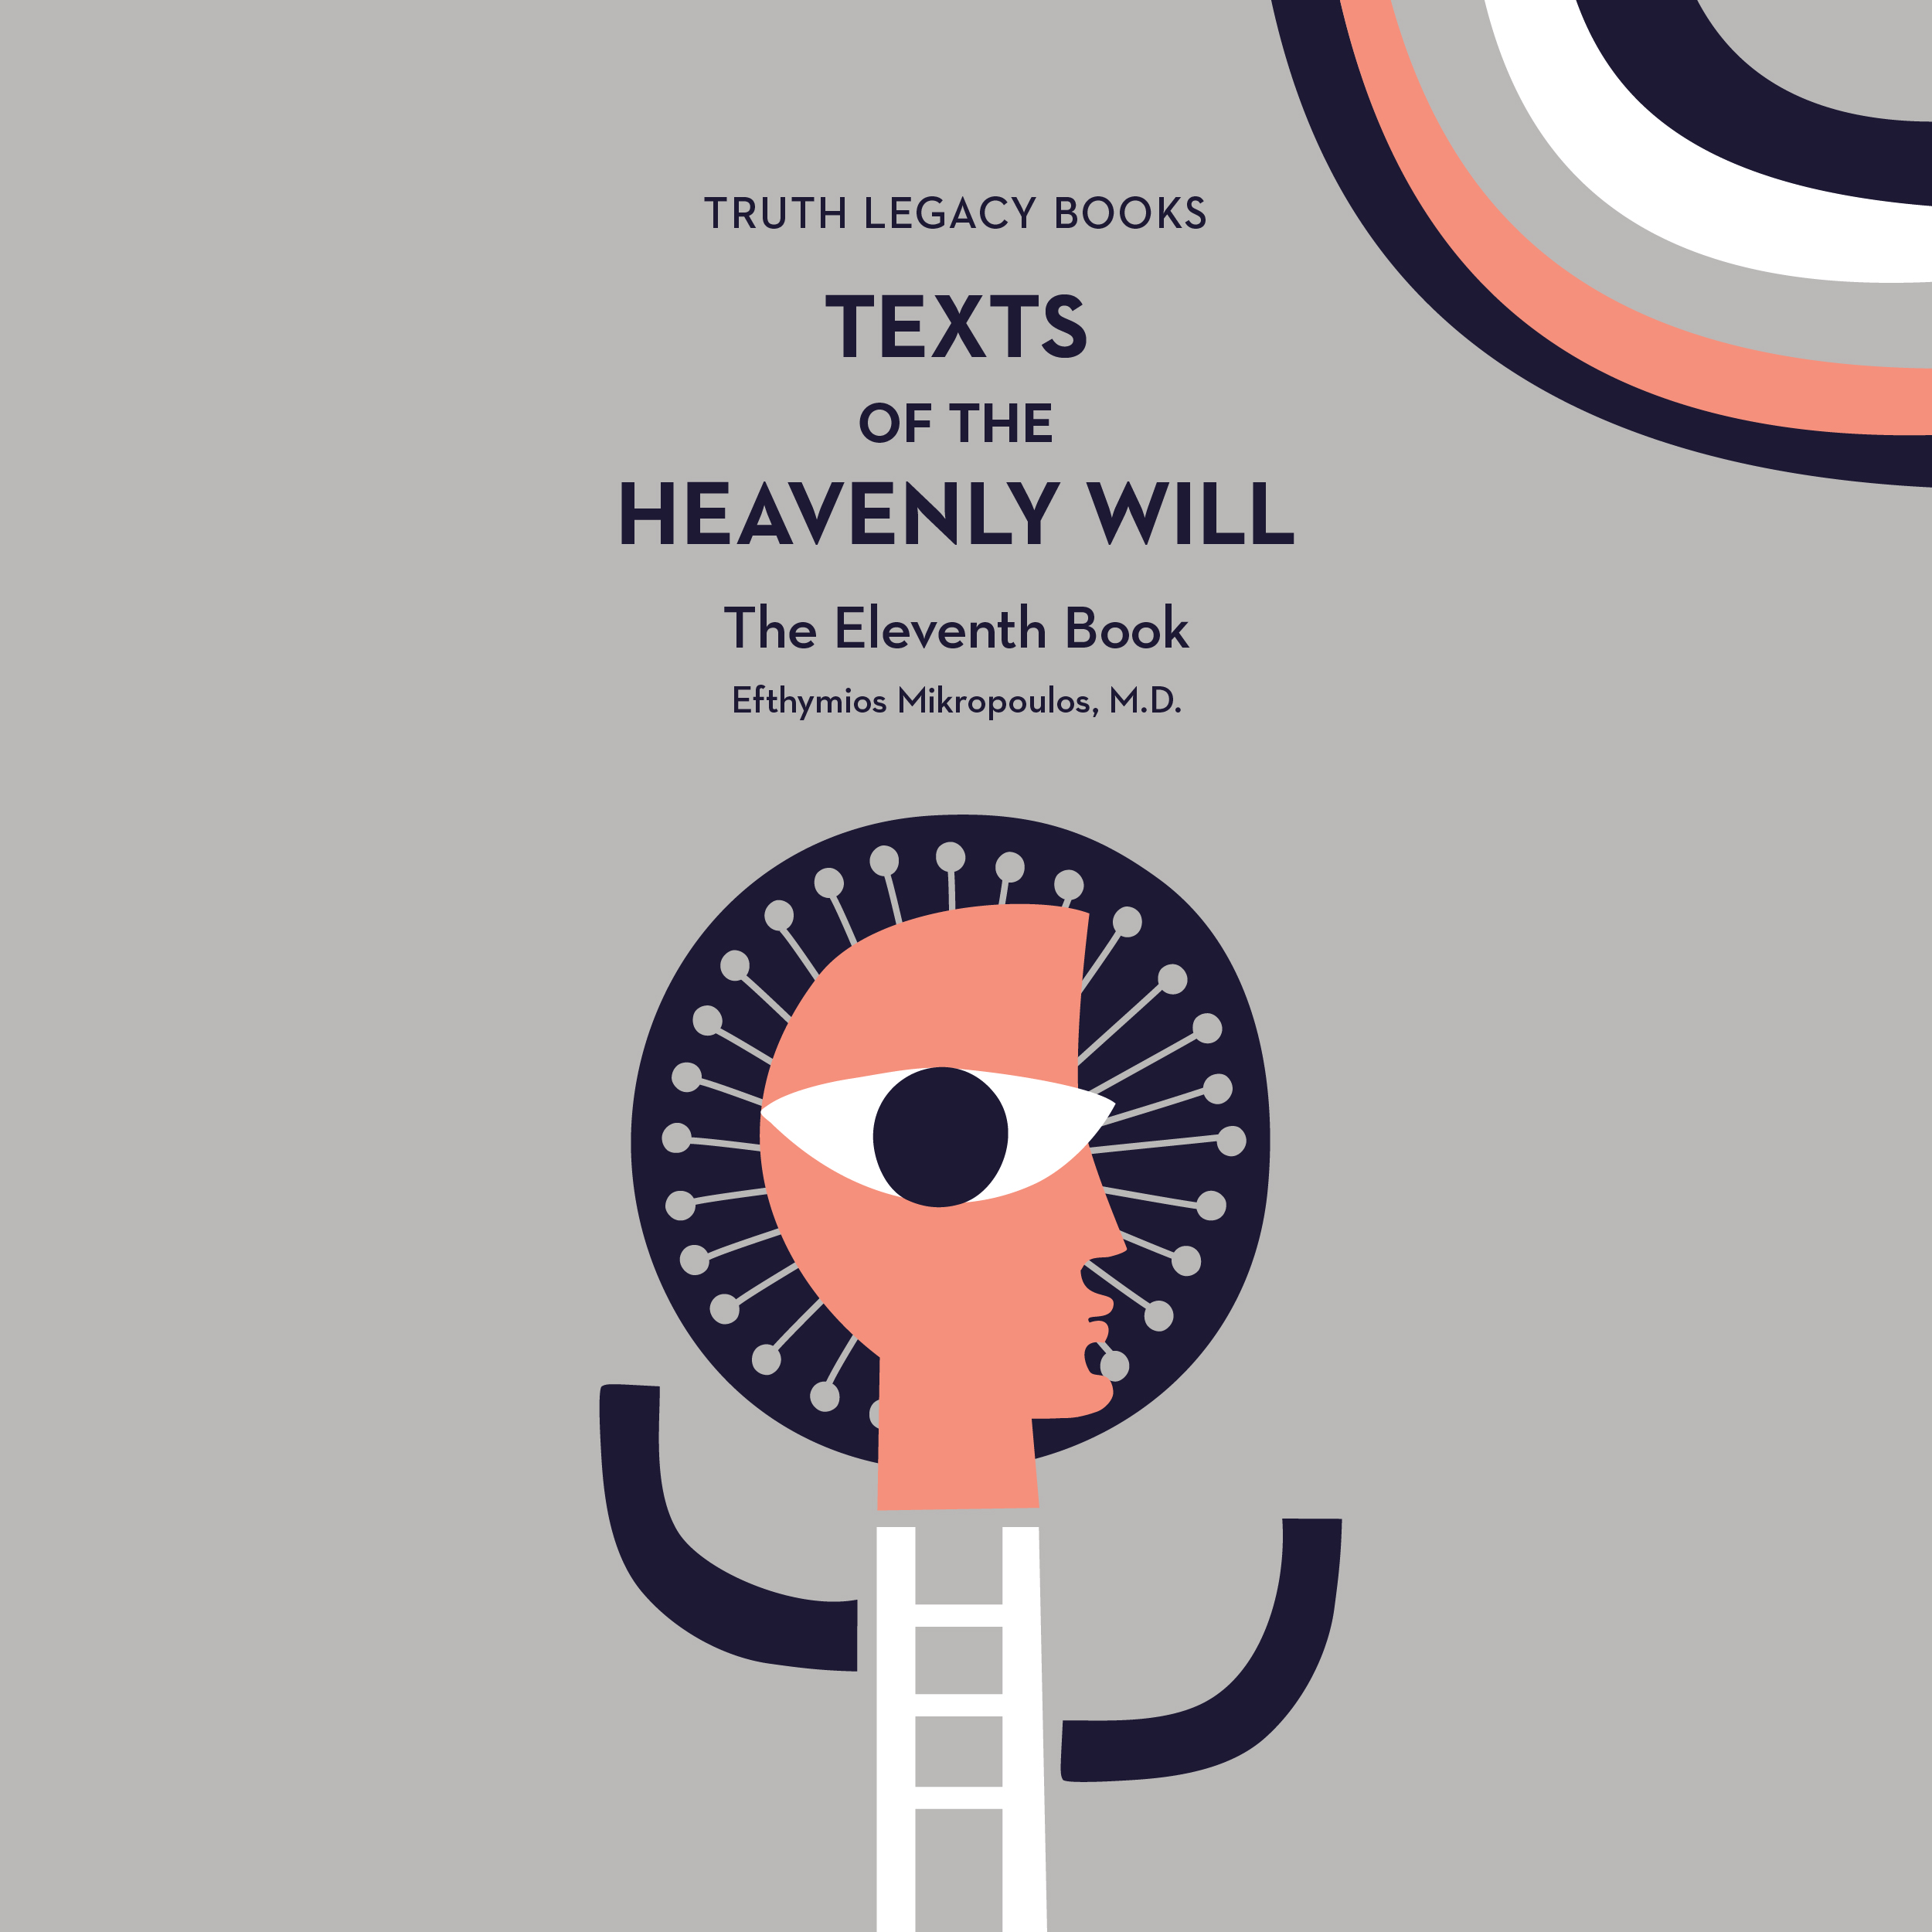 TEXTS OF THE HEAVENLY WILL